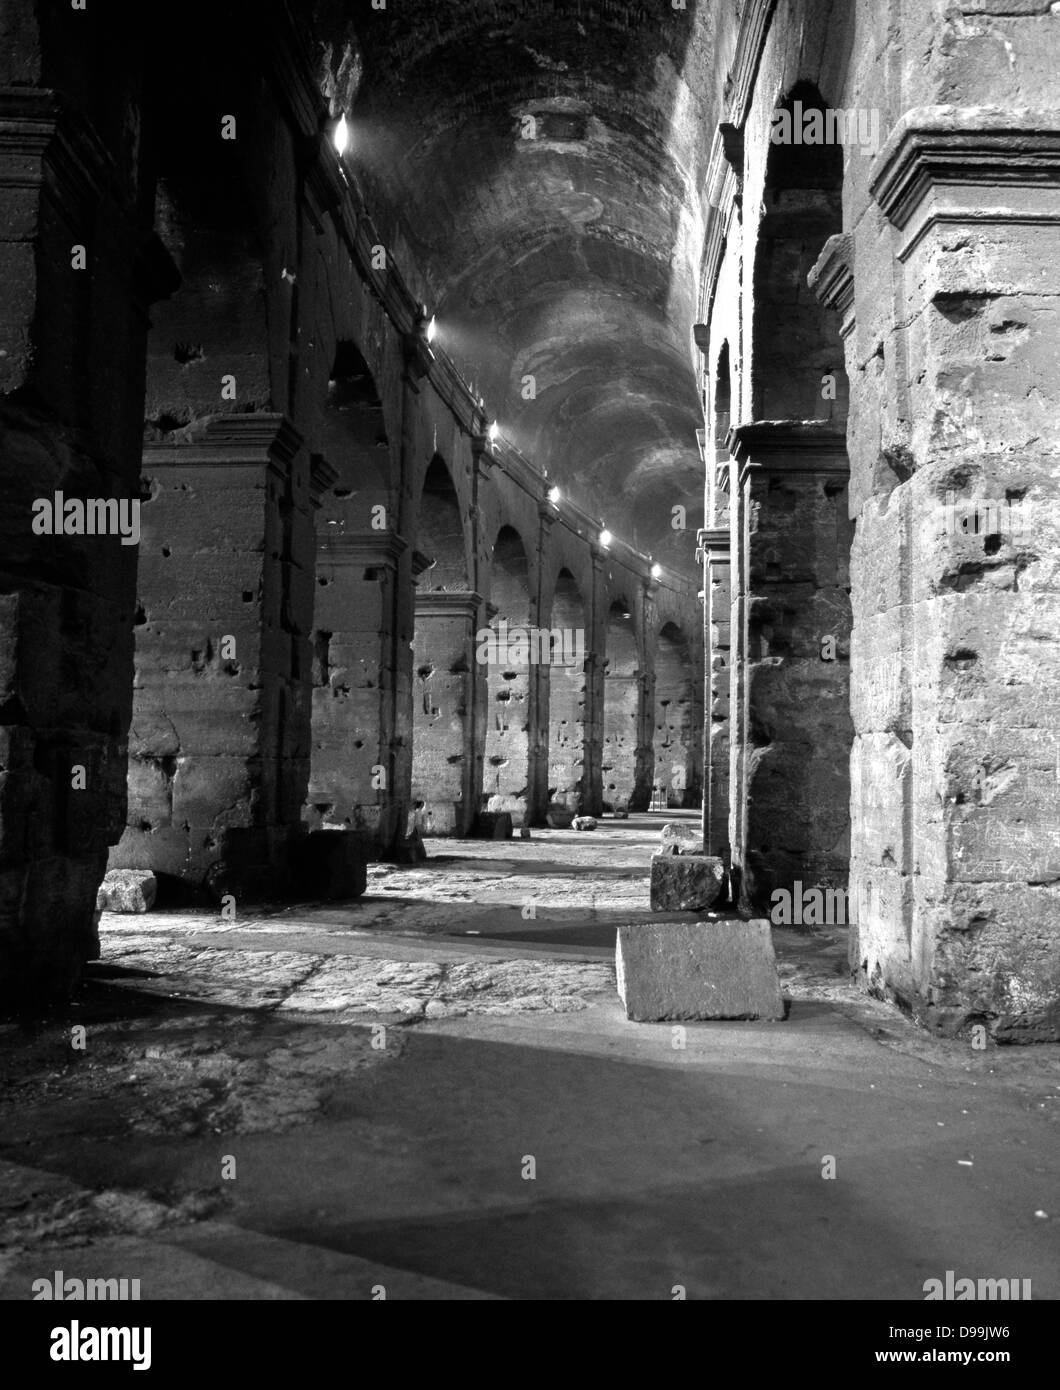 Underneath the arches of the Colosseum at night, Rome, Lazio, Italy, Europe. Stock Photo